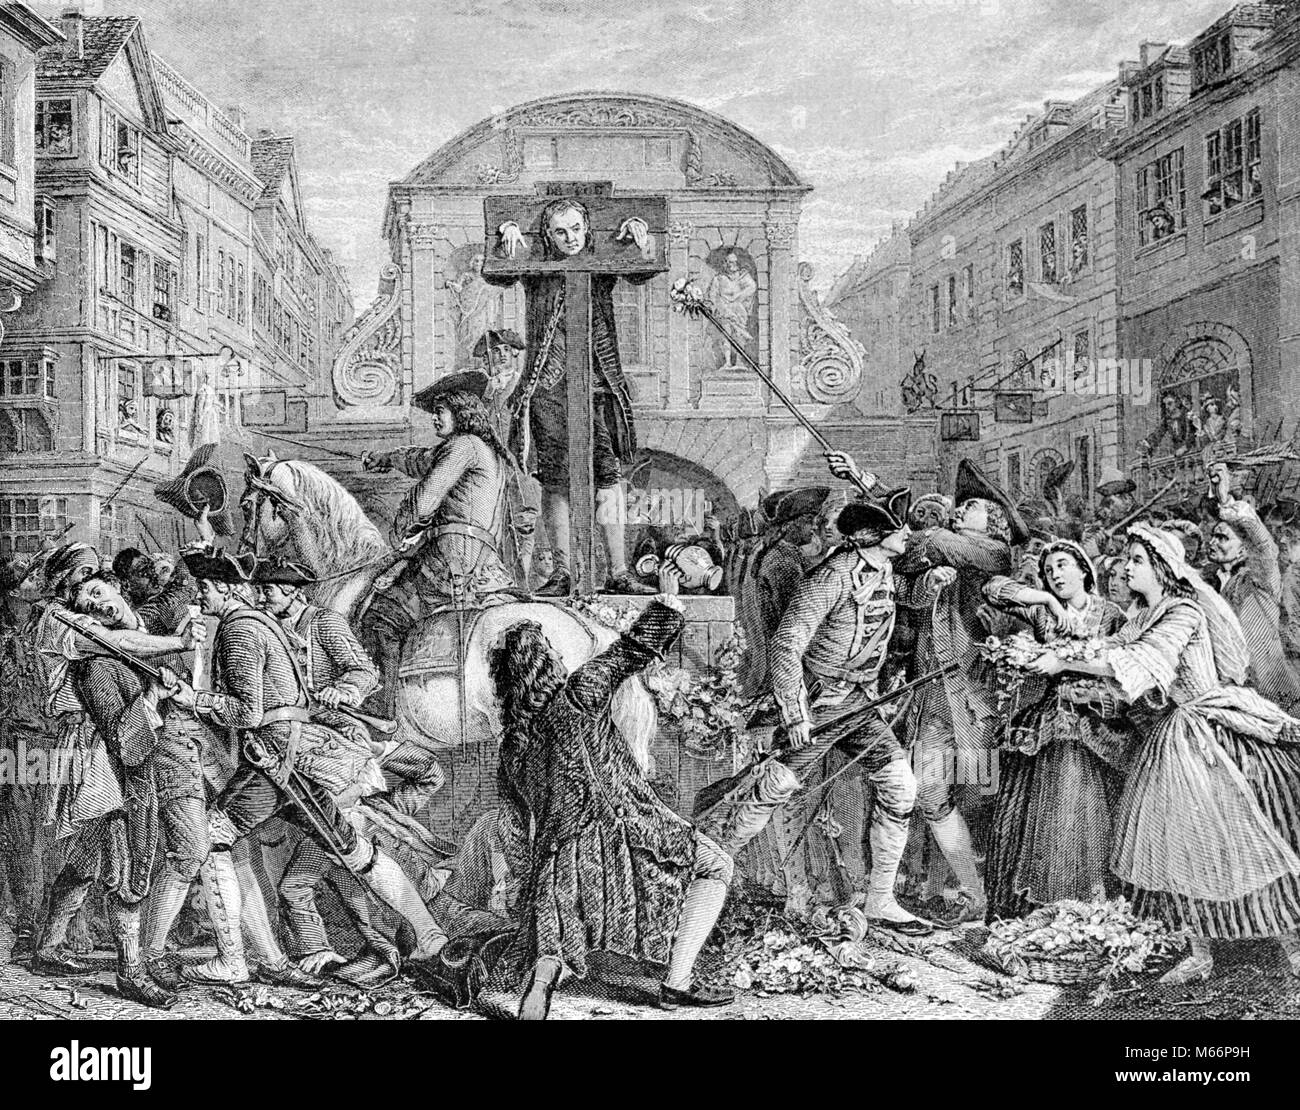 1703 DANIEL DEFOE AUTHOR OF ROBINSON CRUSOE POLITICAL SATIRE SUFFERING PUNISHMENT IN PILLORY BY ANGRY CROWD LONDON ENGLAND - q63393 CPC001 HARS HISTORIC ONE ANIMAL WIDE ANGLE POLITICAL SUFFERING PERSONALITY PUNISHMENT EXCITEMENT FAMOUS RECREATION DEFOE AUTHORITY POLITICS CAPITAL ONE PERSON WITH OTHERS AUTHOR DANIEL PILLORY MALES SATIRE 1702 18TH CENTURY B&W BLACK AND WHITE CAPITAL CITY CAUCASIAN ETHNICITY DANIEL DEFOE DISSENTER EYRE FAMOUS PERSON LIBEL OCCUPATIONS OLD FASHIONED PERSONALITIES SEDITION THE SHORTEST WAY WITH DISSENTERS Stock Photo